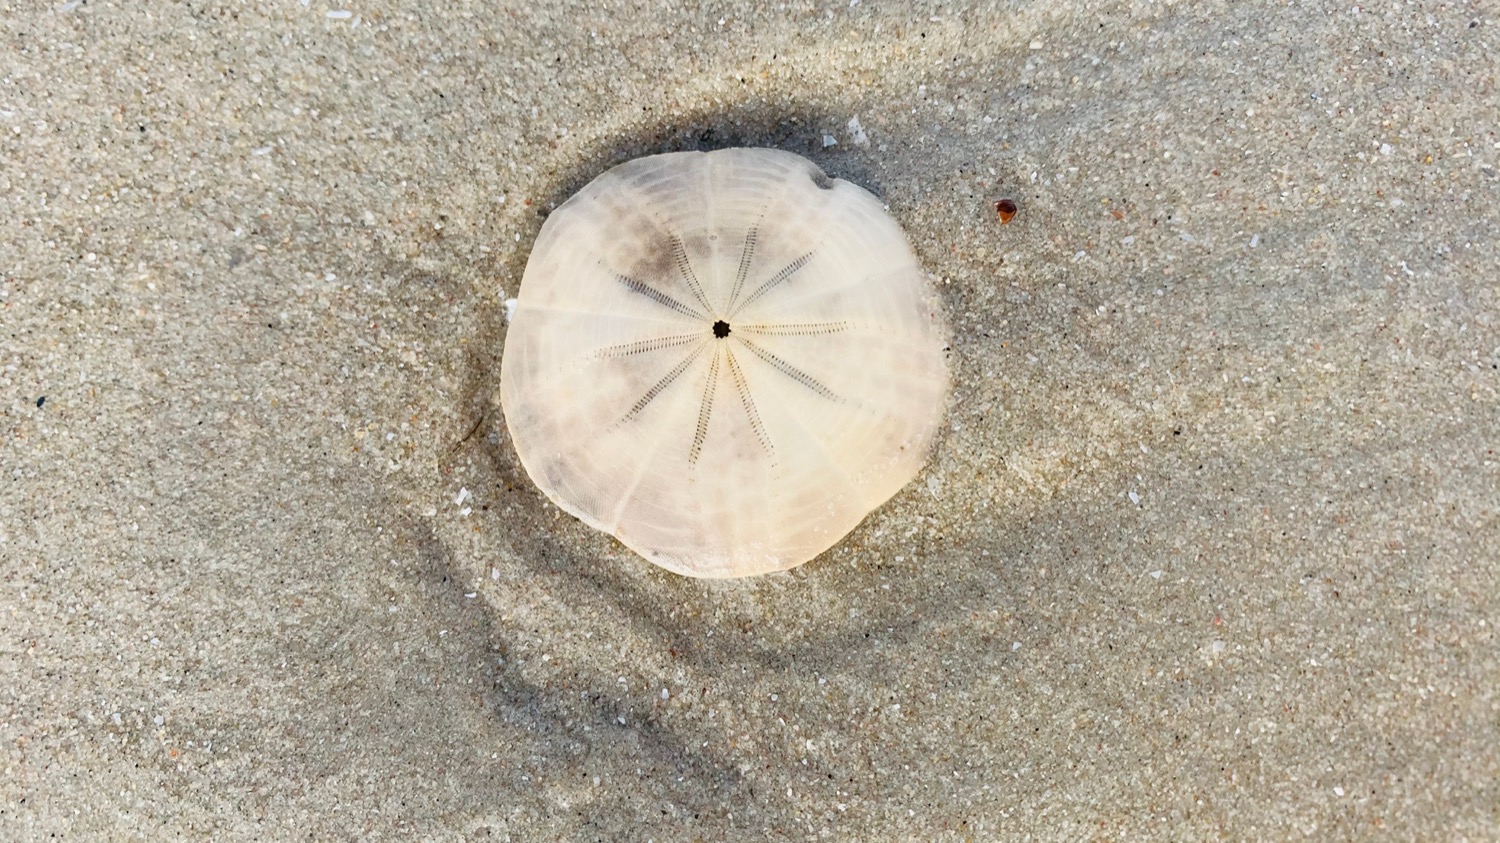 a circular sand dollar in the sand. a vague star-like pattern is at the center with a small hole in the middle